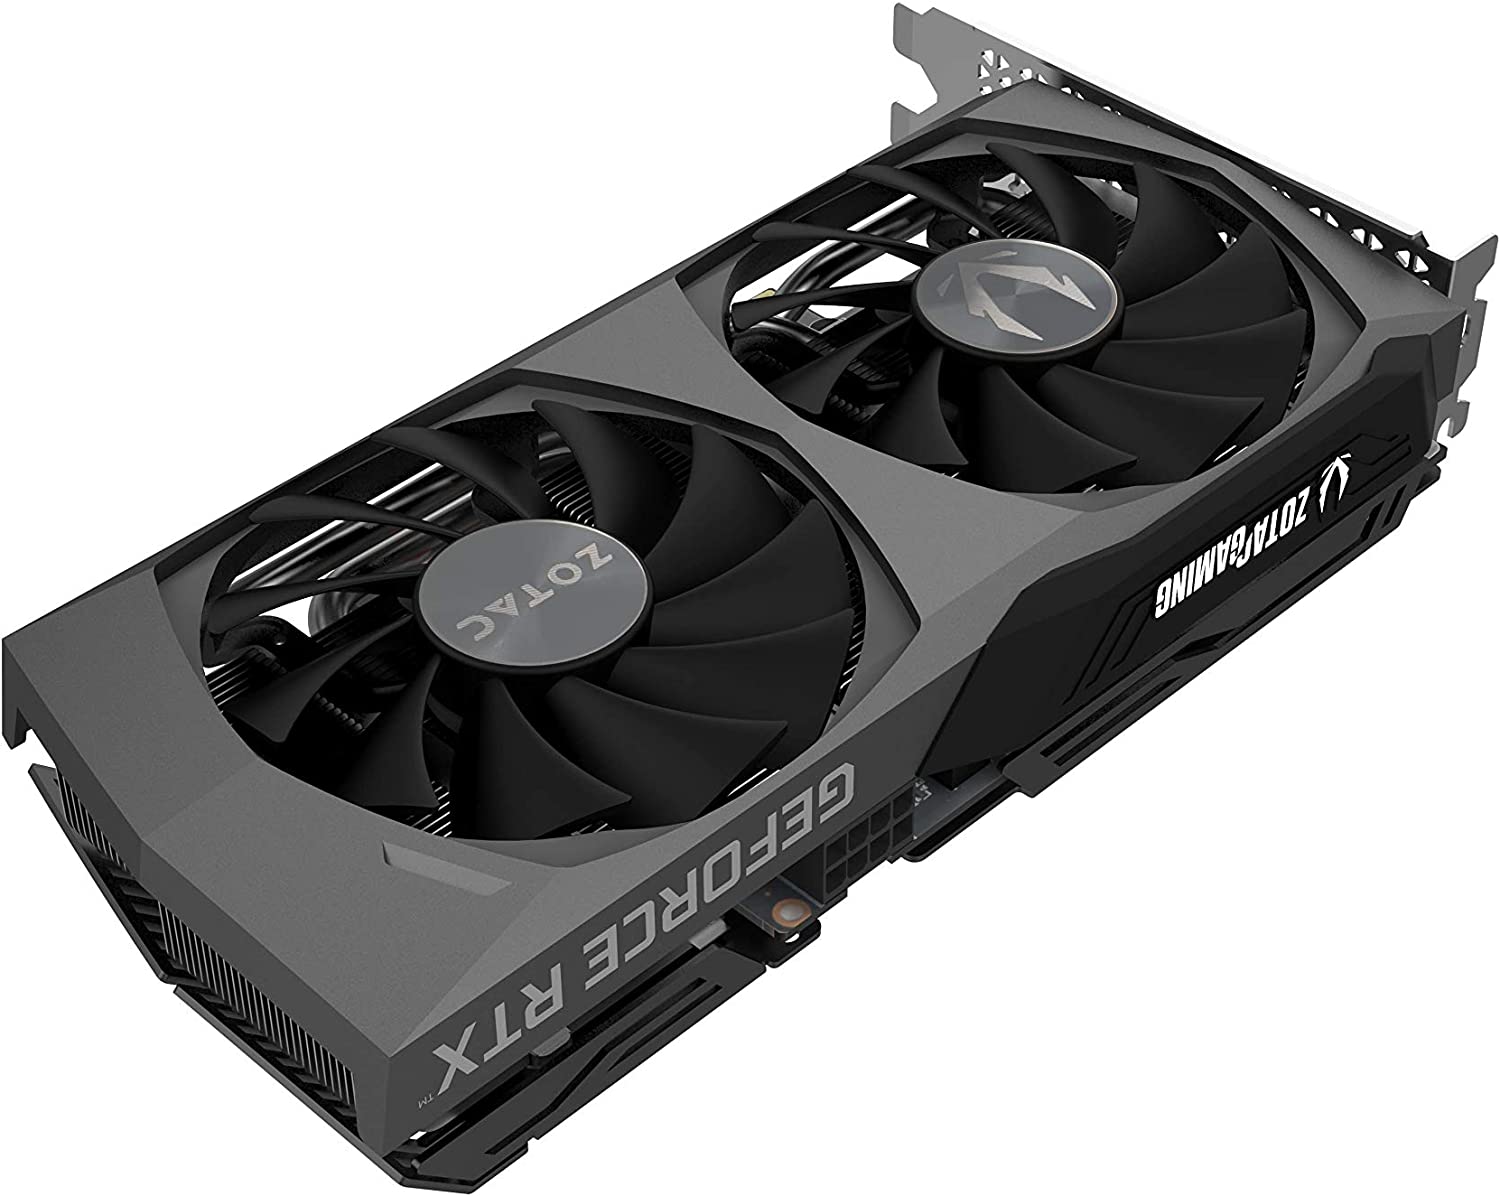 NVIDIA GeForce RTX 3060 Is Now The Most Popular GPU On Steam